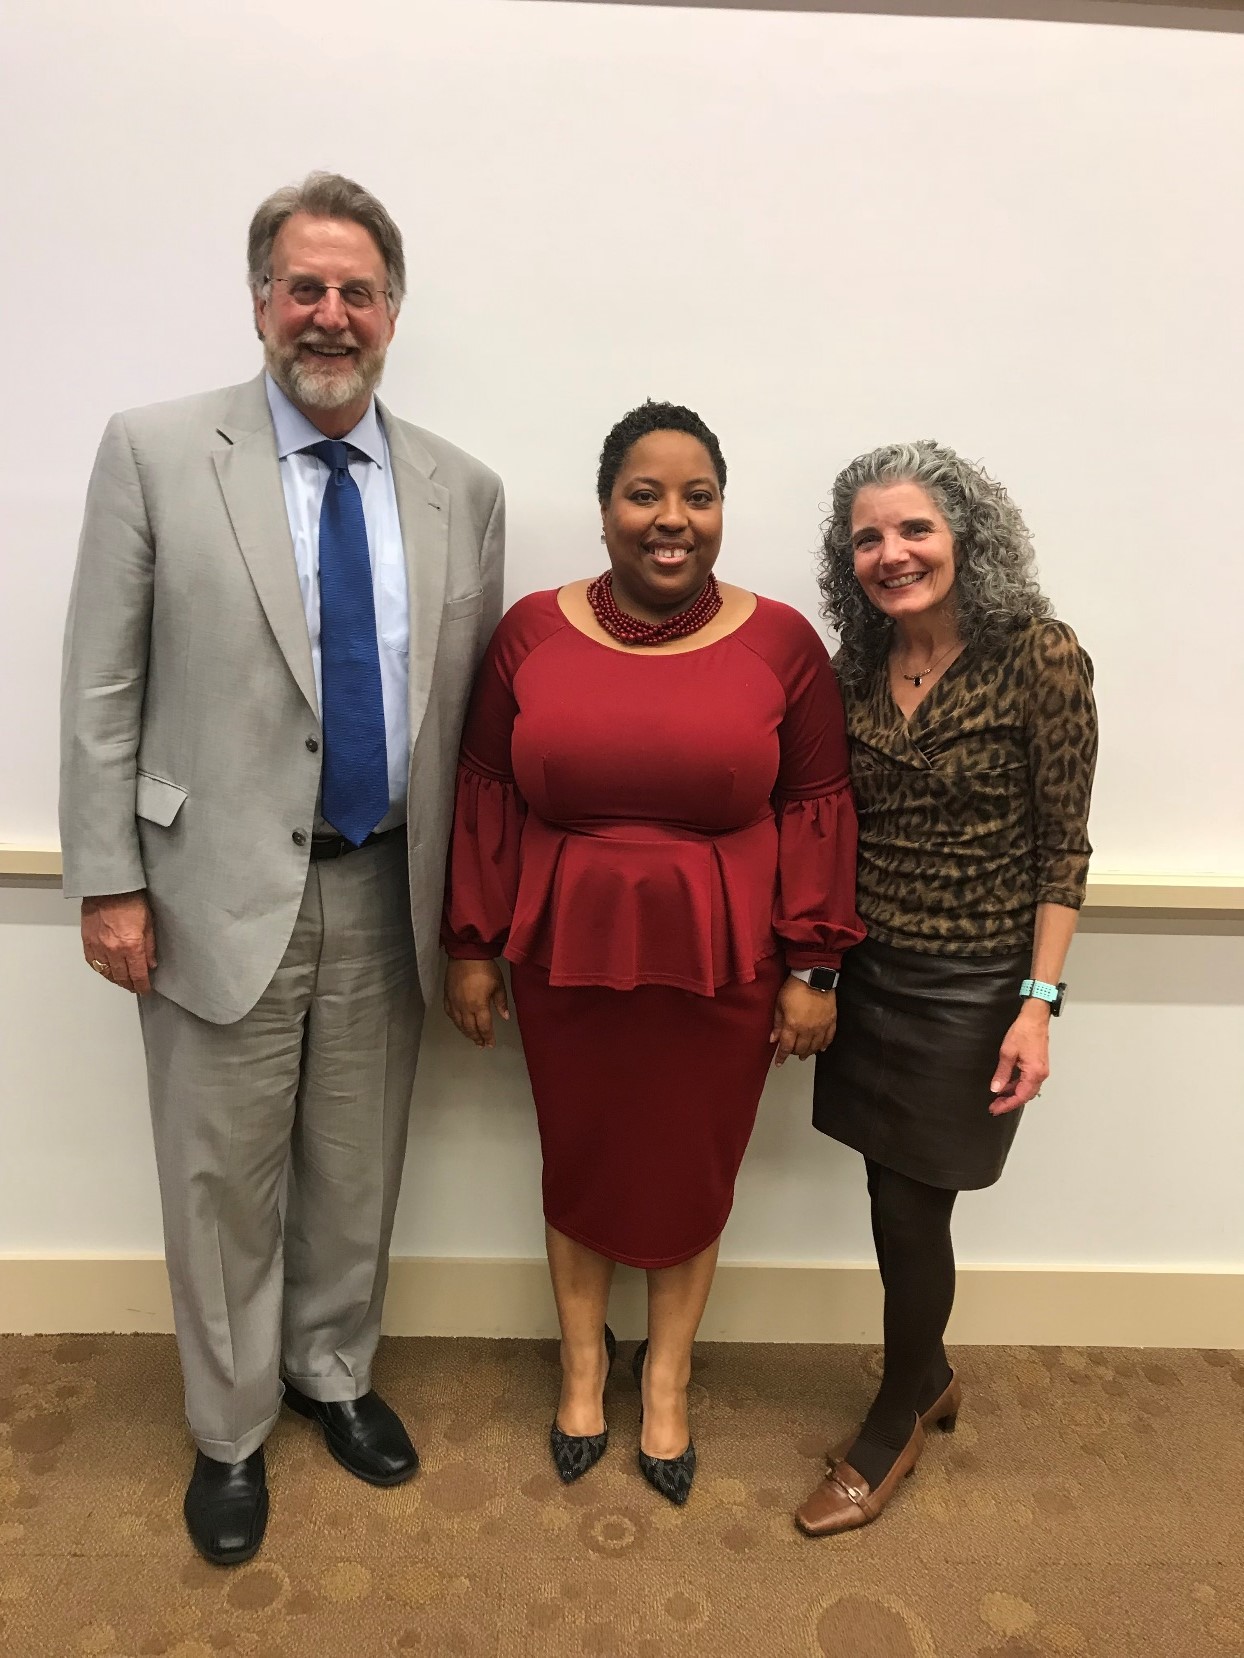 Lacrecia Cade, JD ‘02 (center) with Dean Niles (left) and Dr. Pamela Eddy (right).